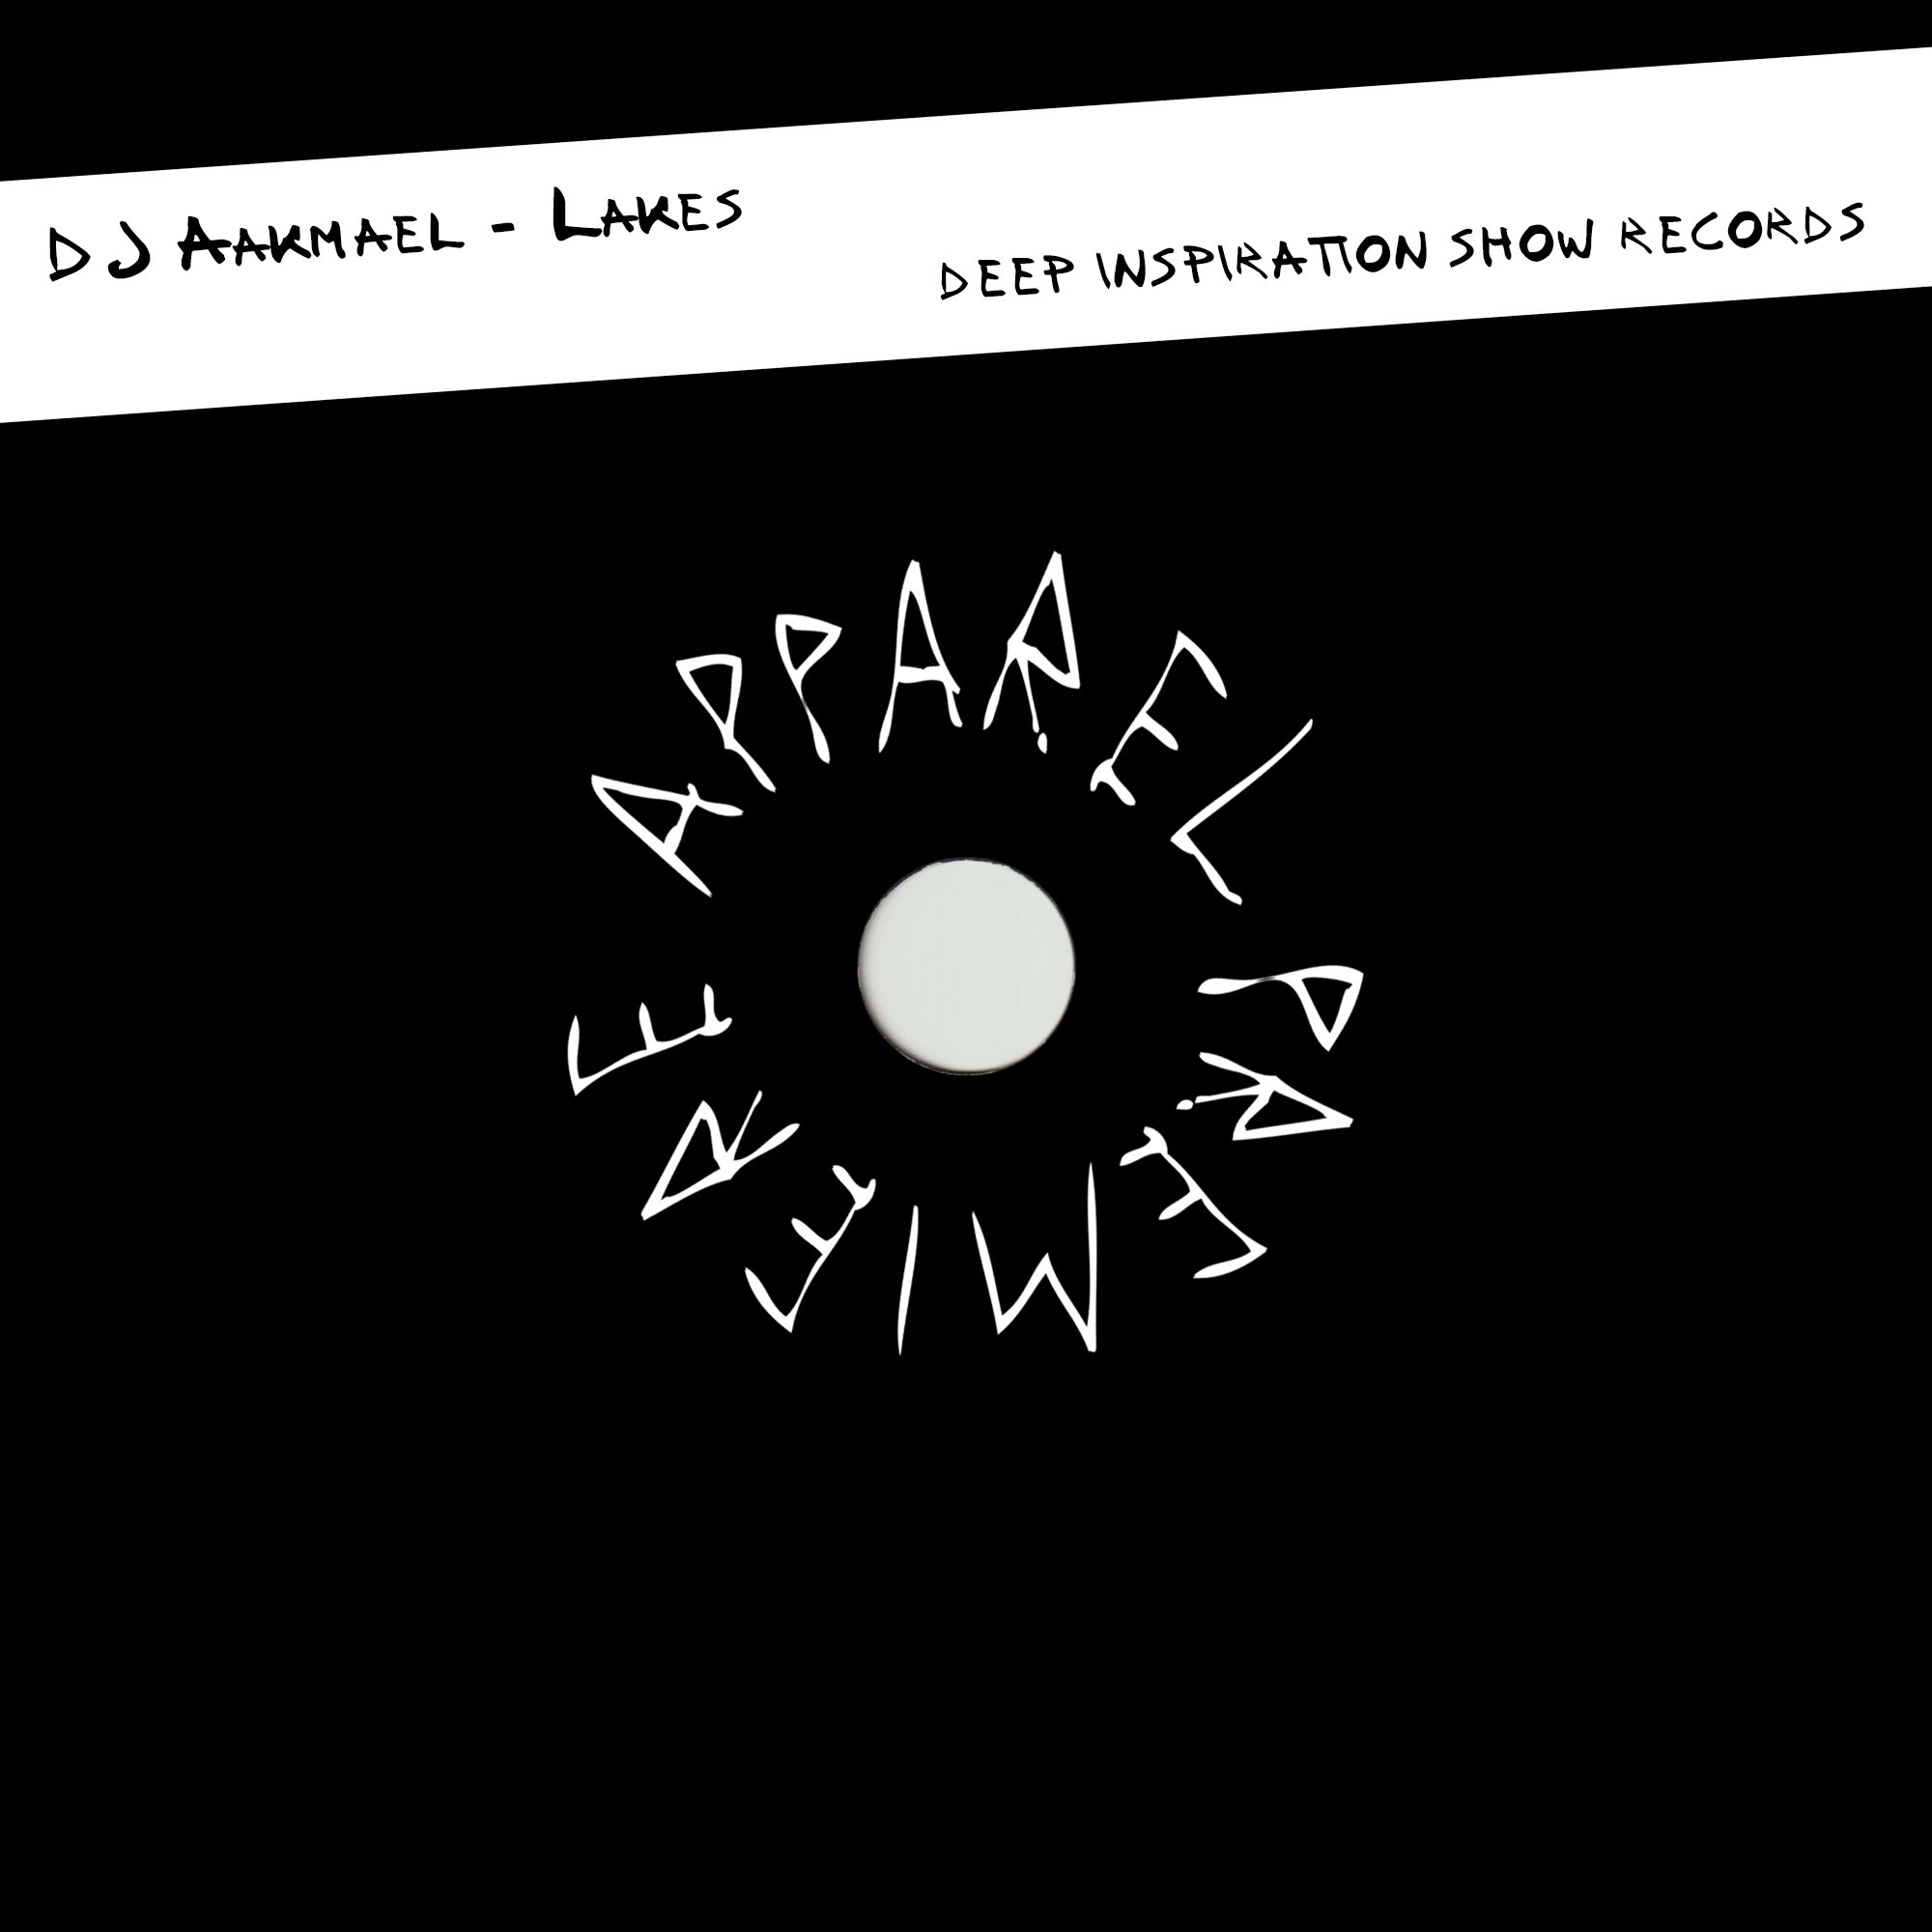 APPAREL PREMIERE DJ Aakmael – Lakes [Deep Inspiration Show Records]